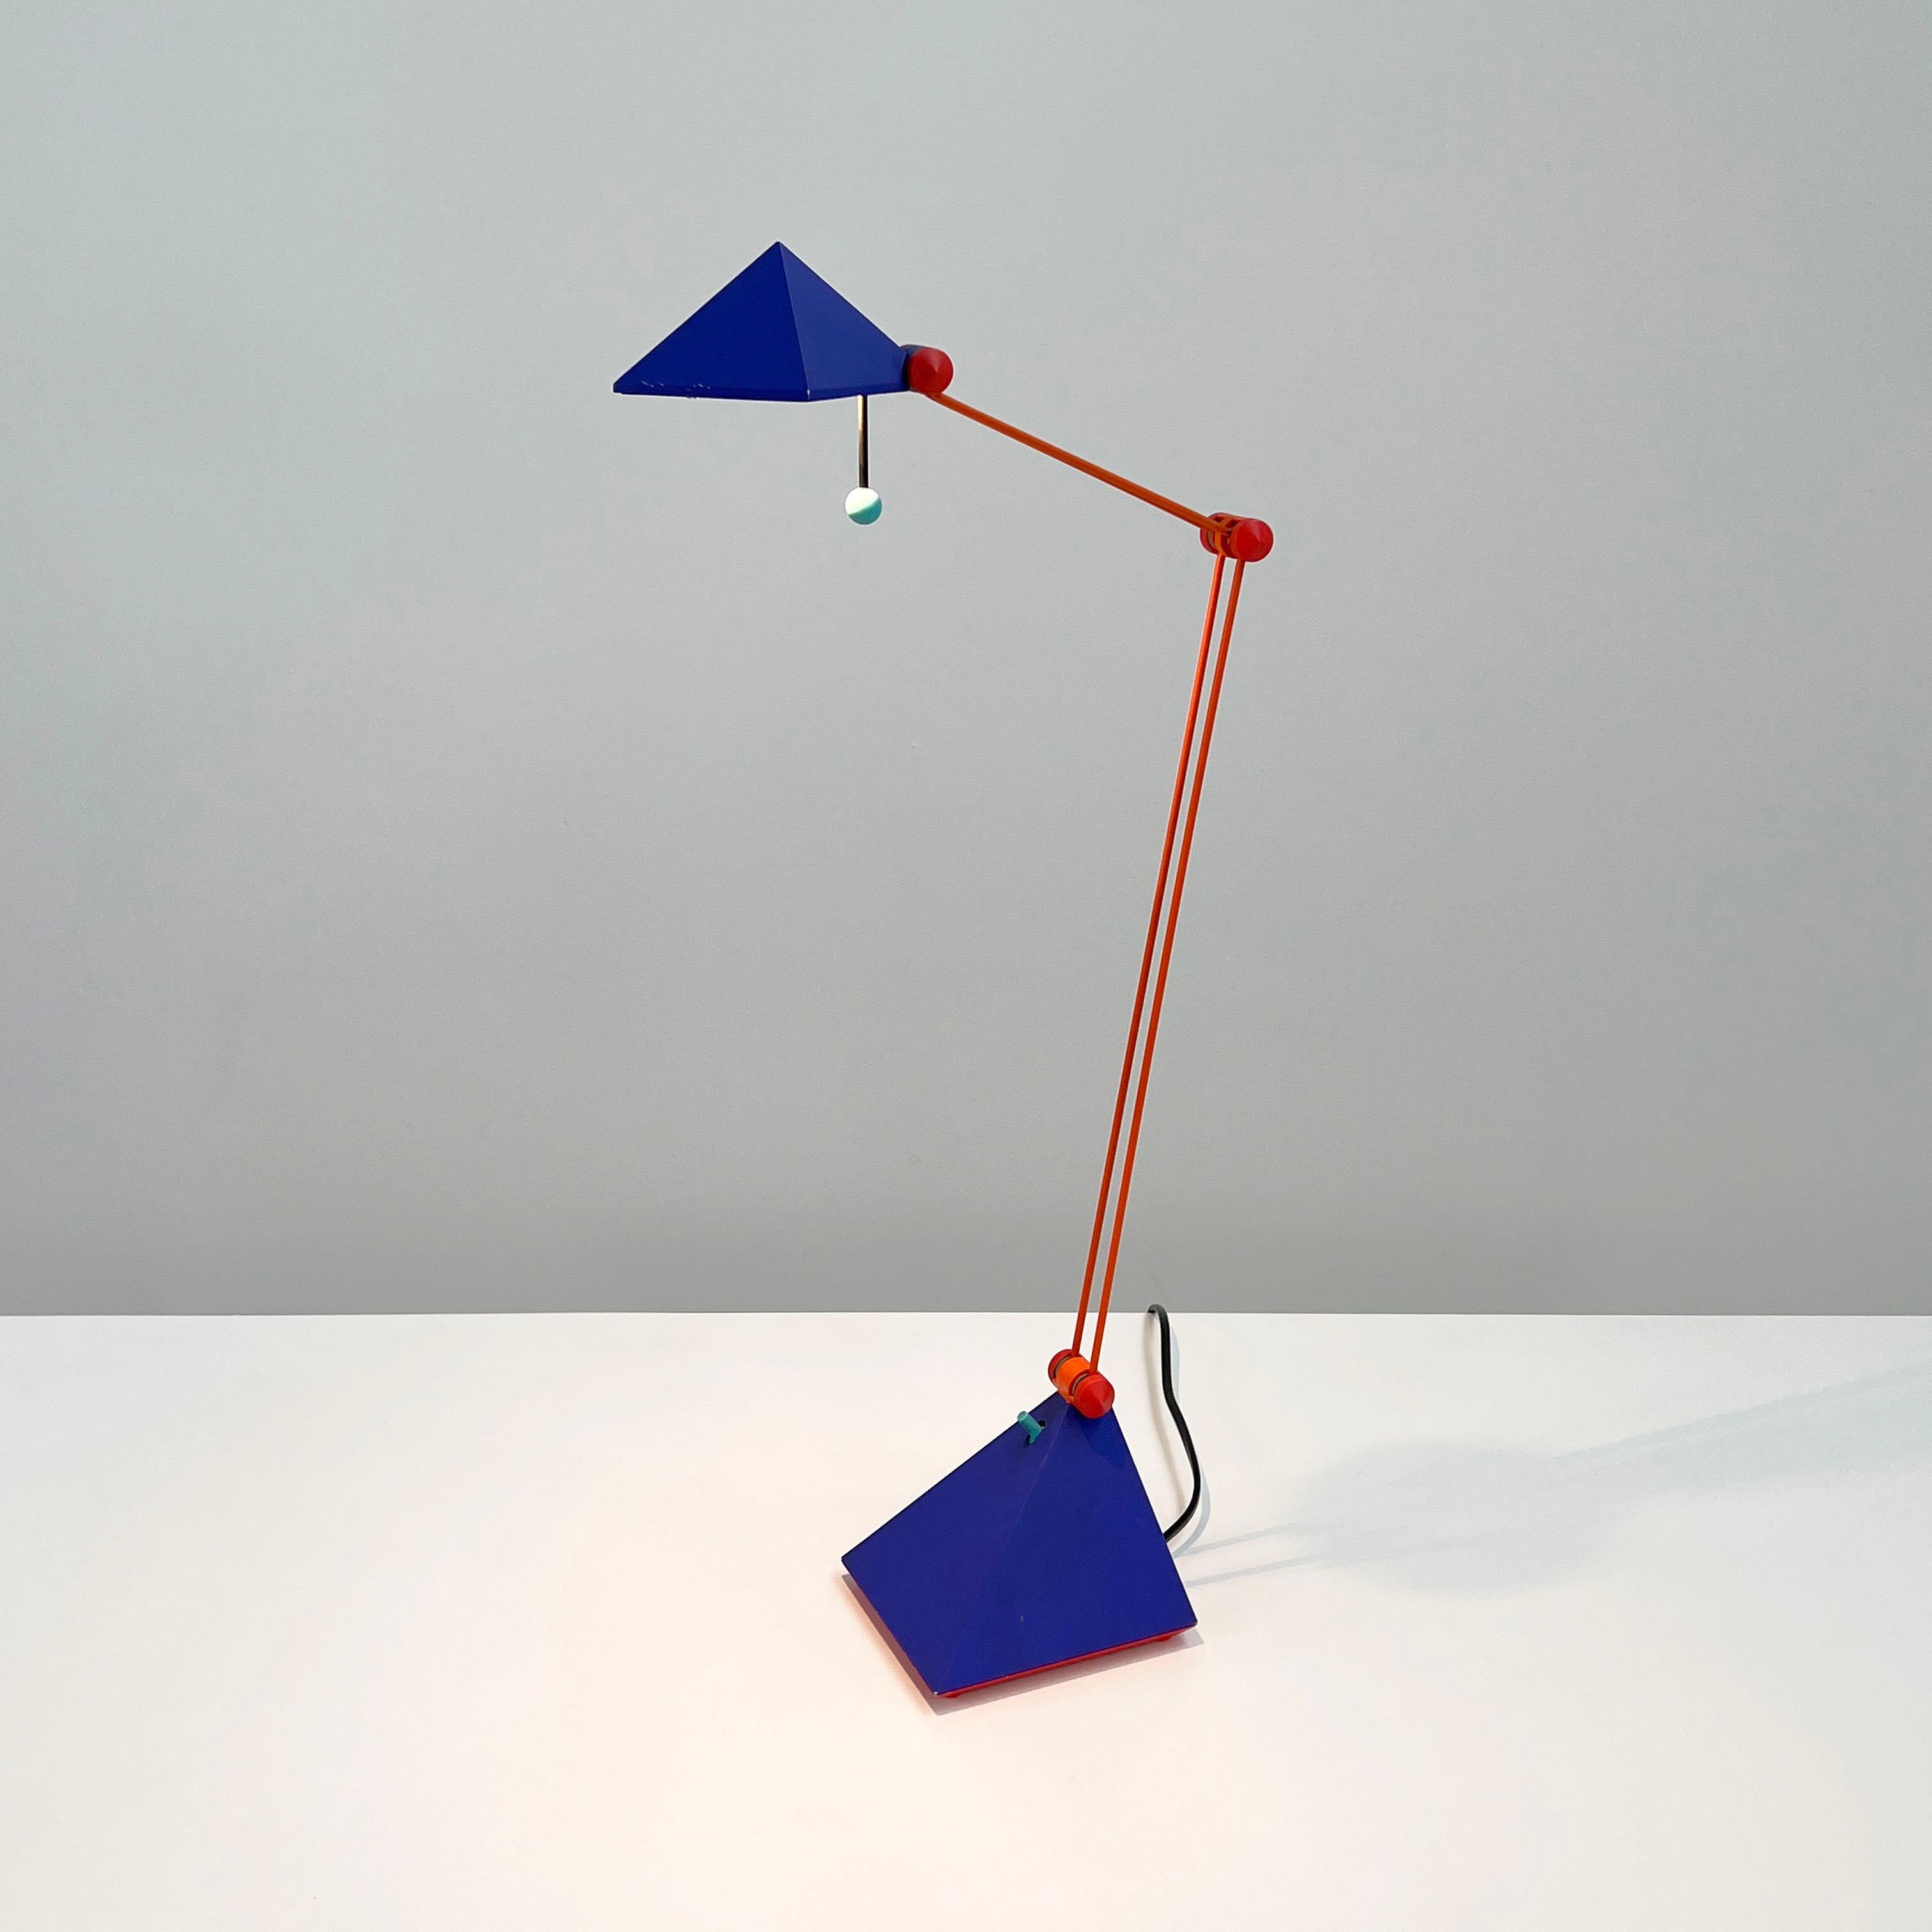 Designer - Lungean and Pellmann
Producer - Brilliant Leuchten Germany 
Design Period - Eigthies
Measurements - Width 14 cm x Depth 40 cm x Height 55 cm
Materials - Metal, Plastic
Color - Orange, Blue, Red
Light wear consistent with age and use. The